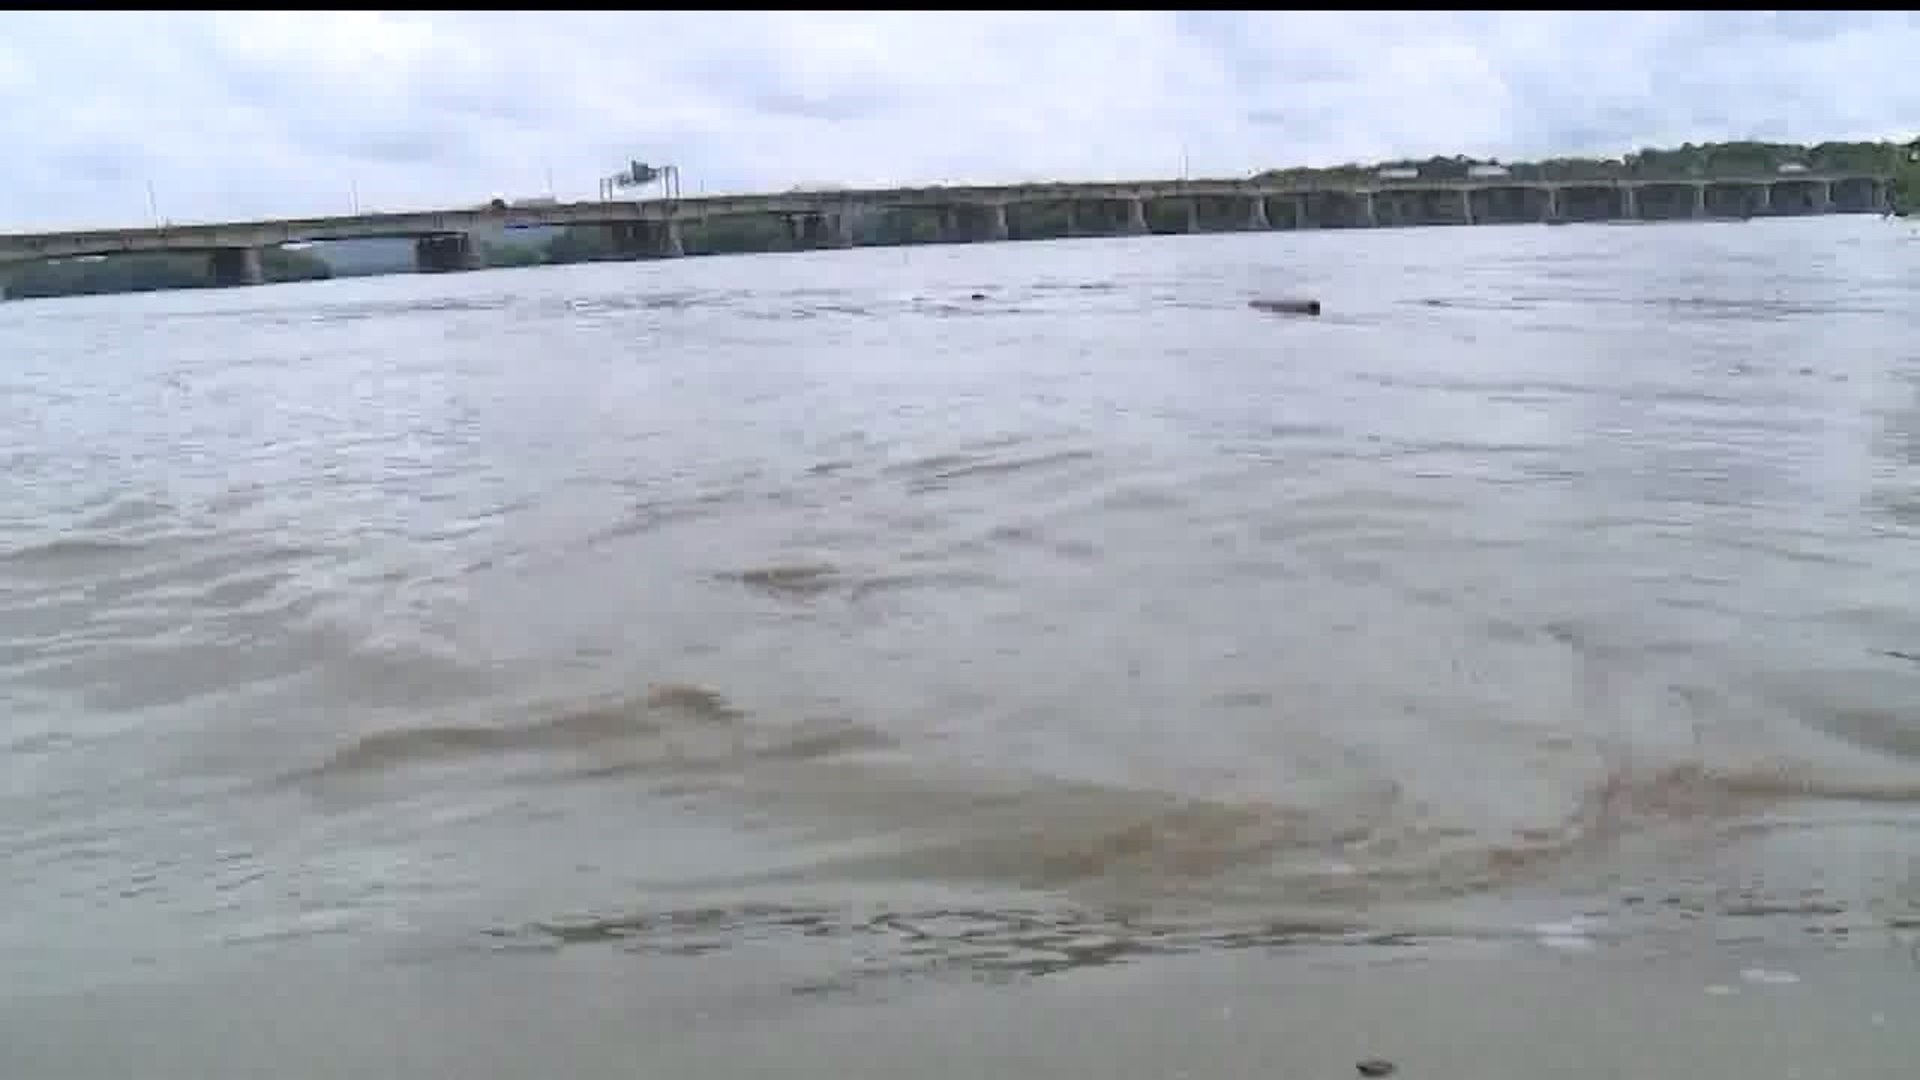 Officials closely monitoring the Susquehanna River near Harrisburg